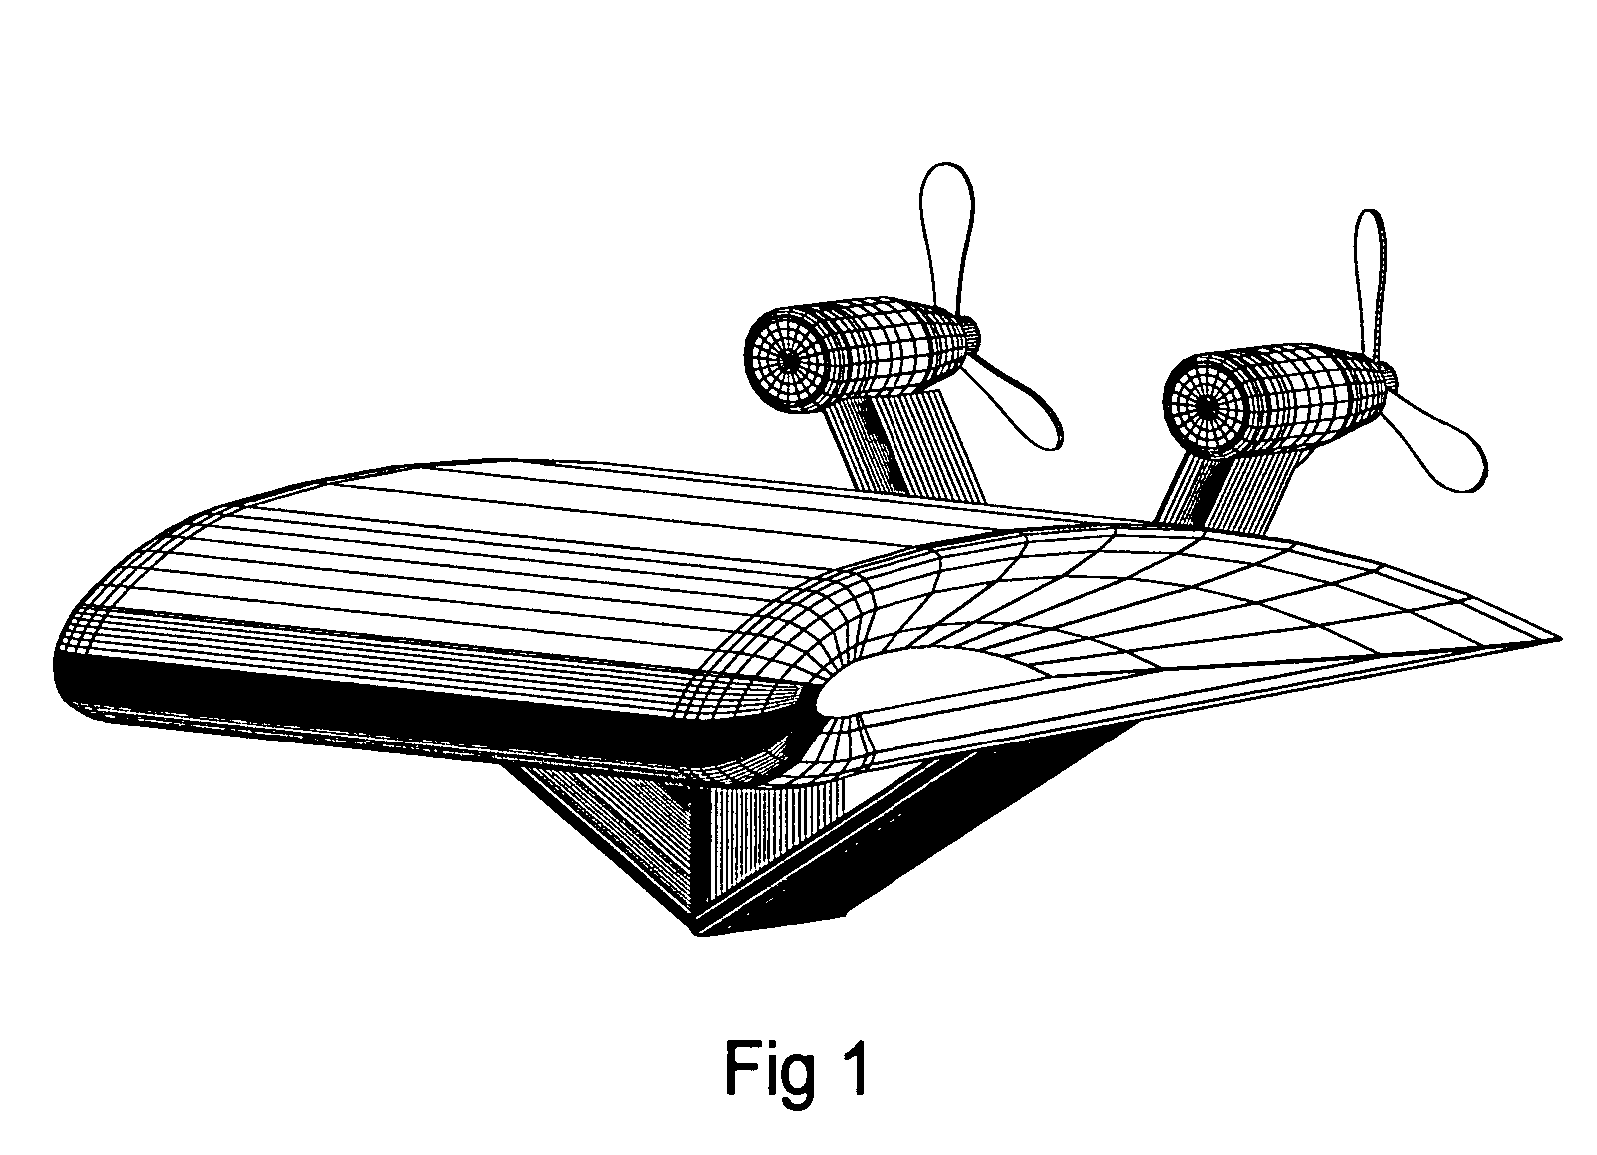 Passenger watercraft using three methods of lift; displacement, hydrofoil, and ground-effect (wing-in-ground) operating over water